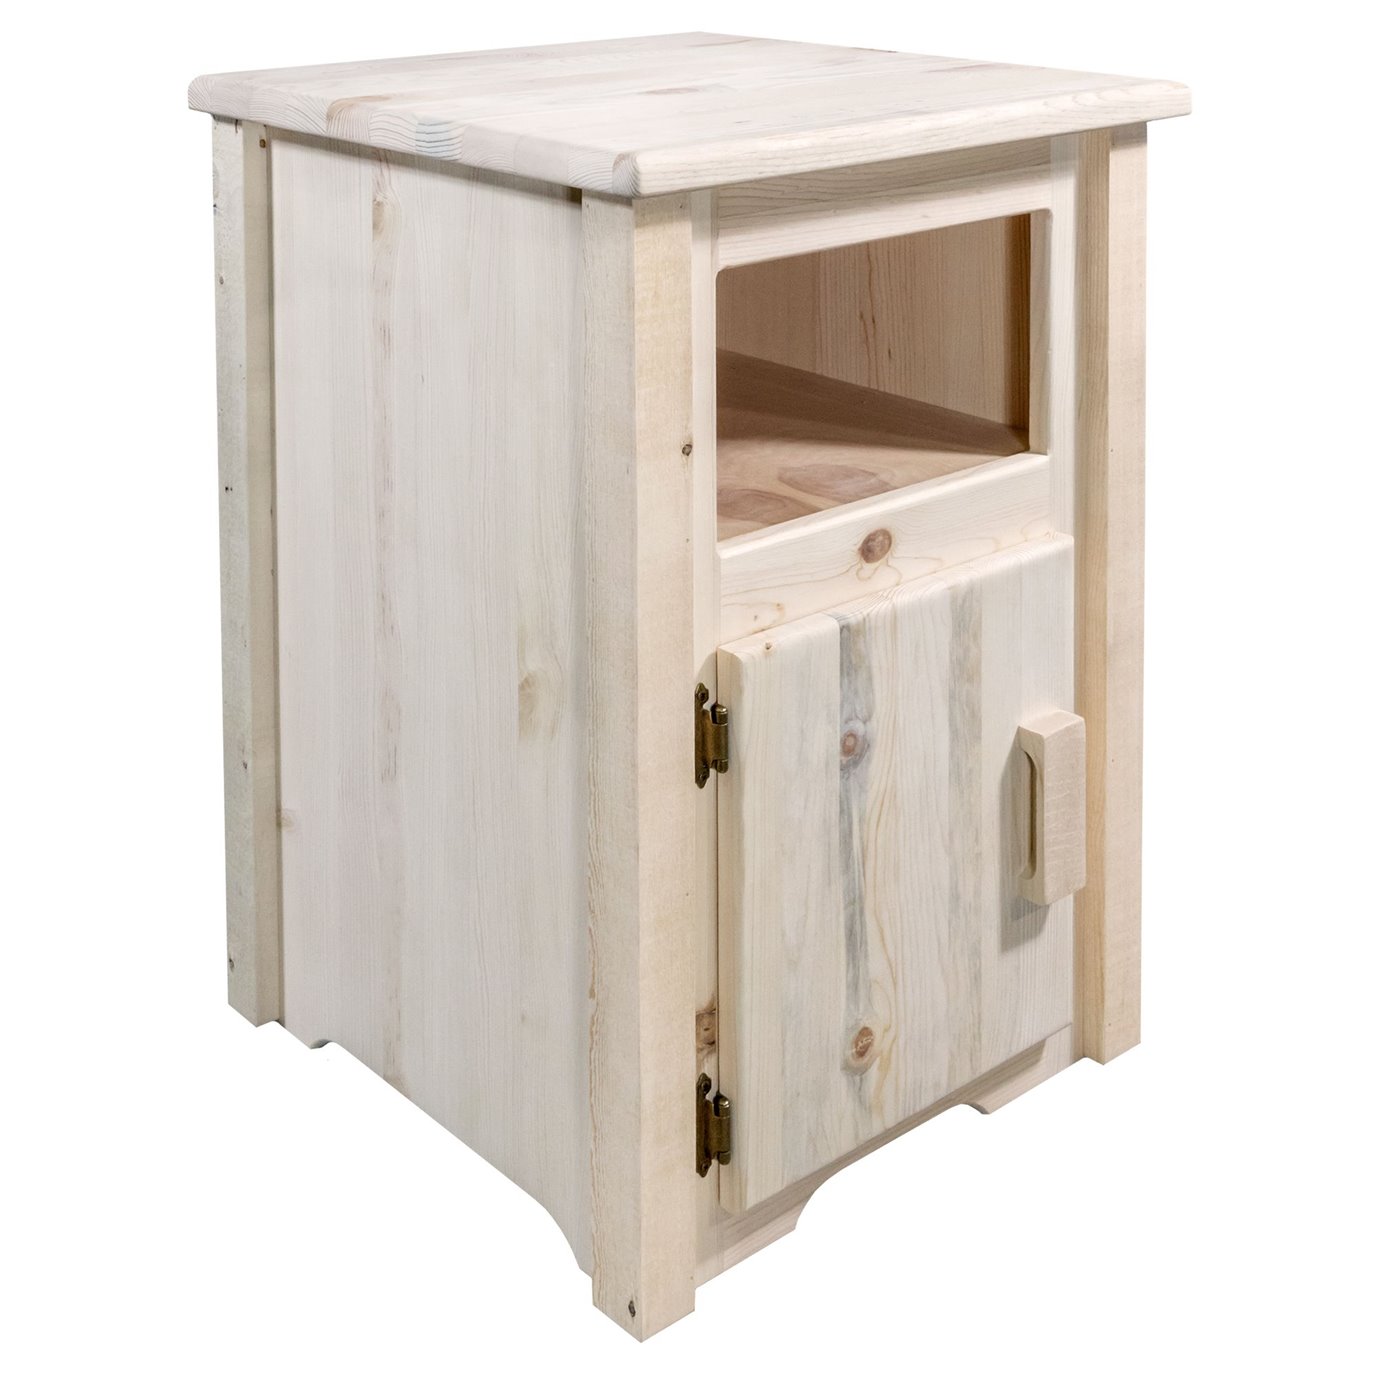 Homestead End Table w/ Left Hinged Door - Ready to Finish